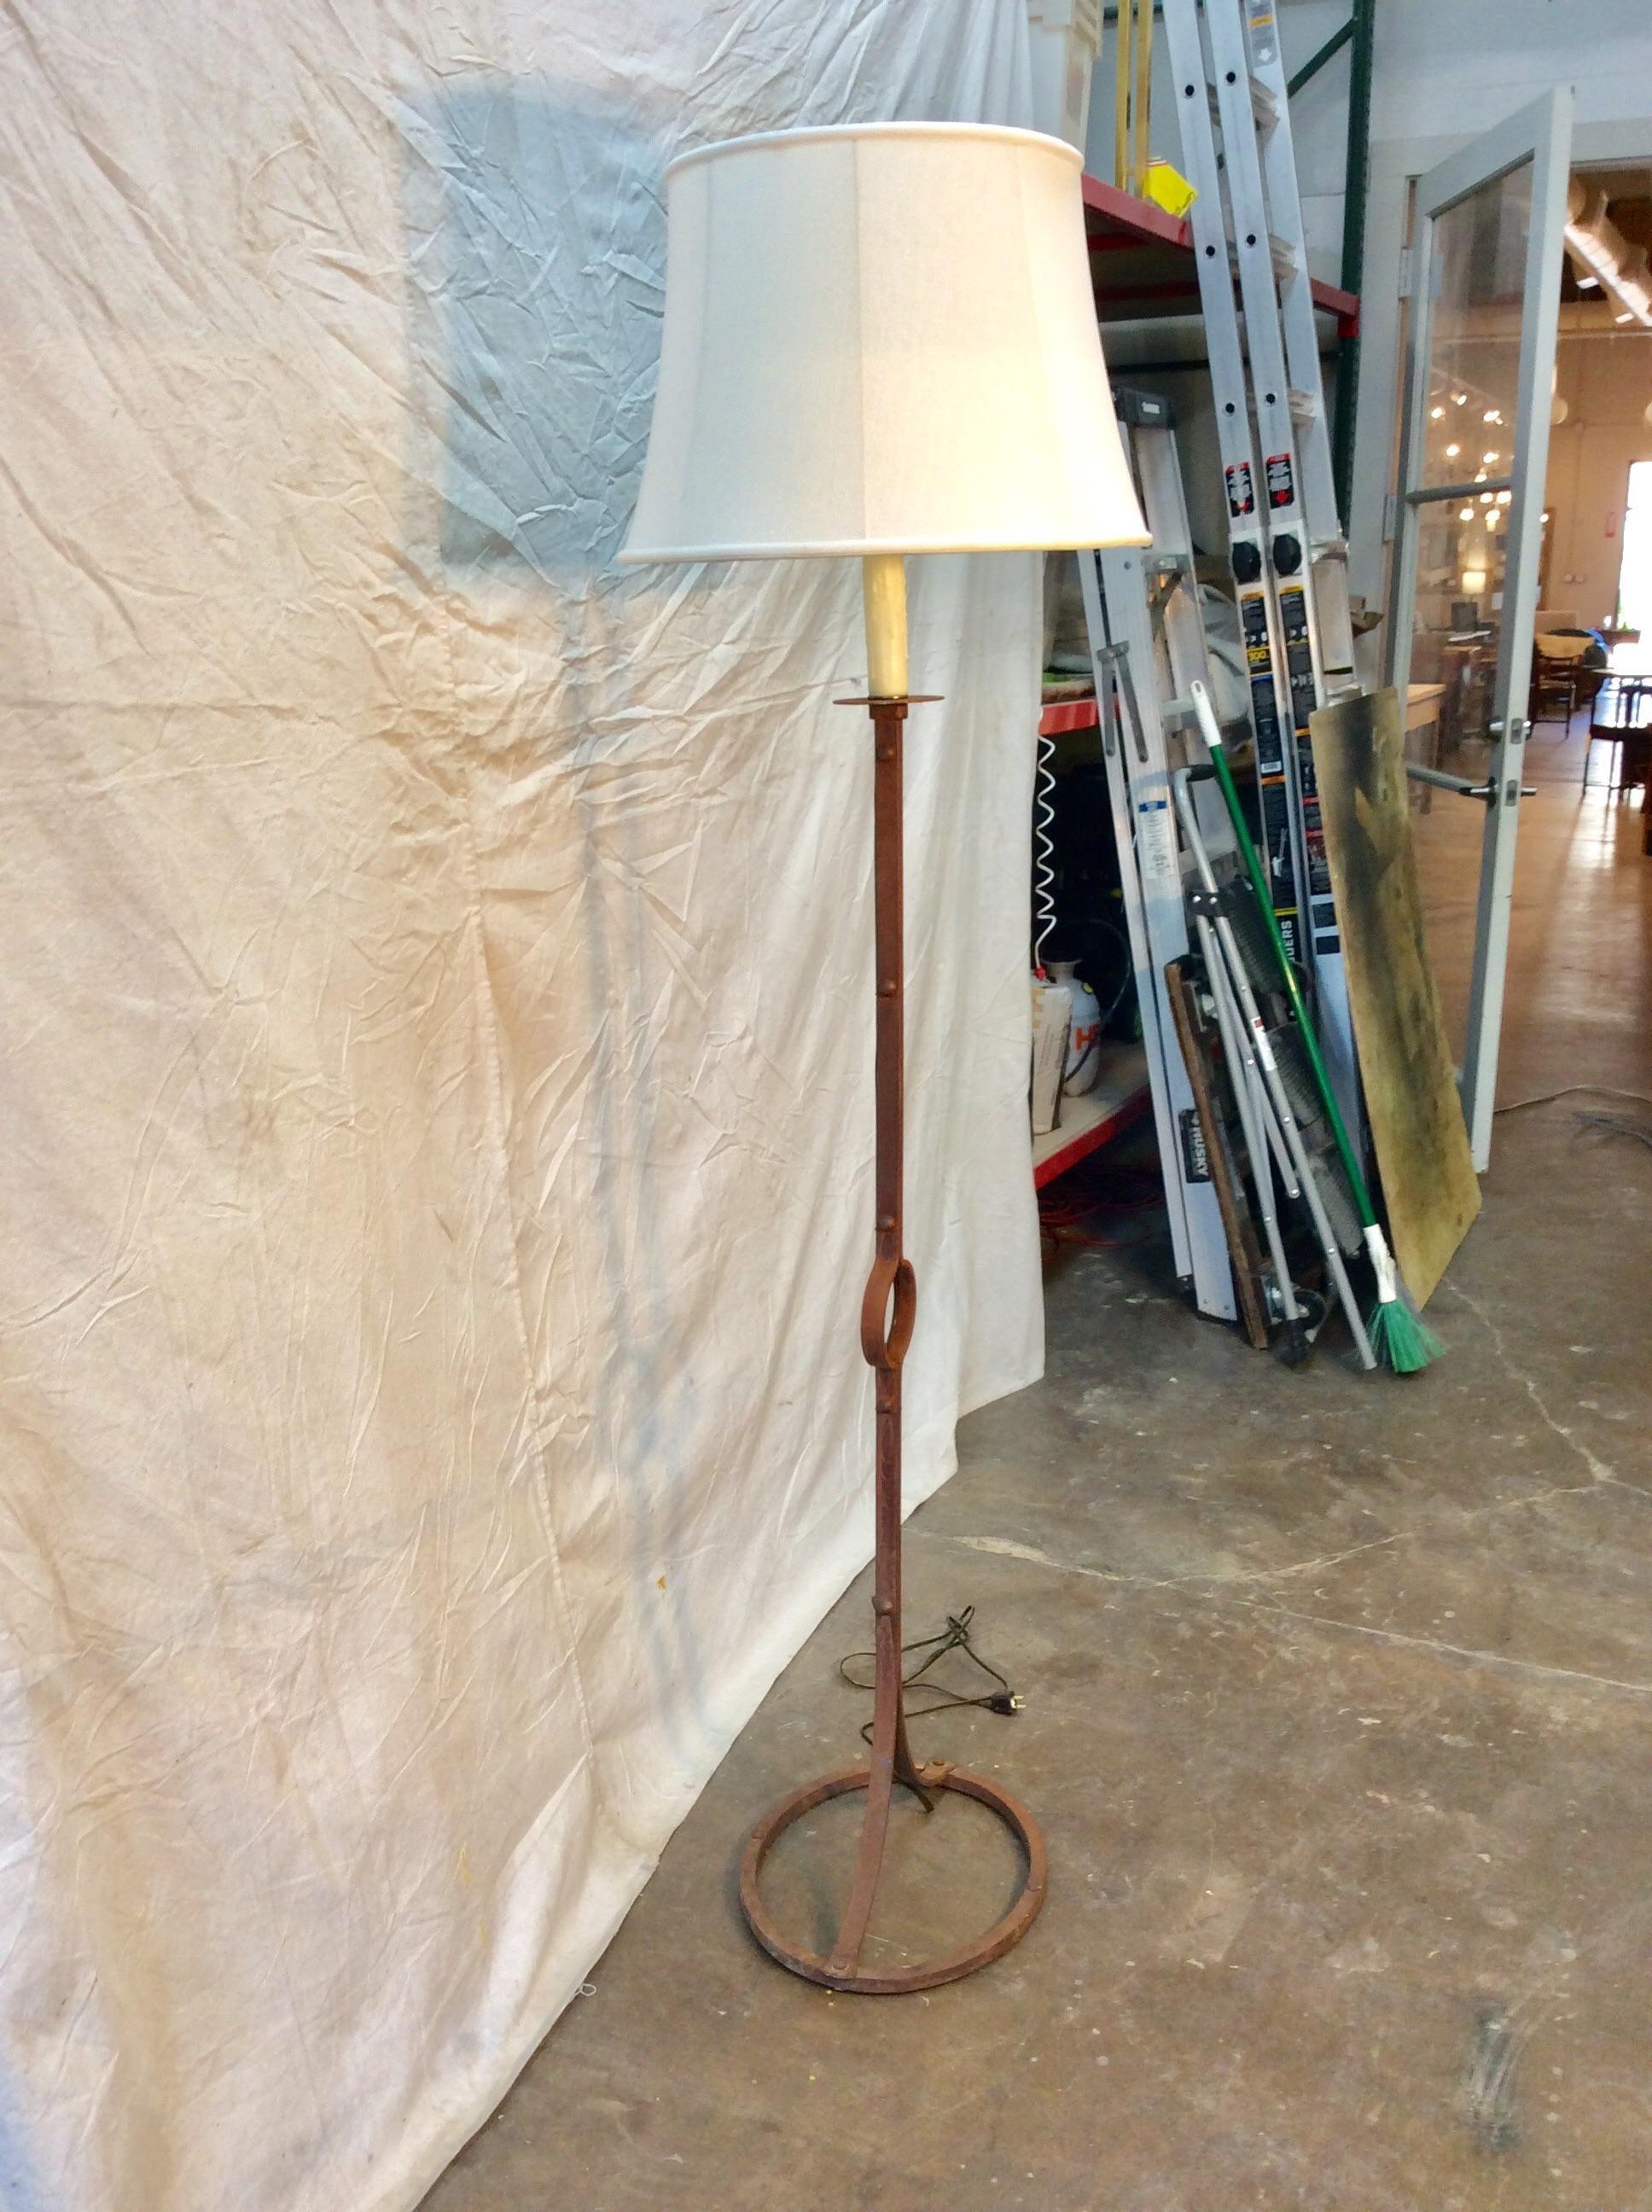 Found in the South of France, this Early 20th century French Iron Floor Lamp features a central sphere and rests on an iron oval. Simple and chic this piece would be at home in any decor.

Floor Lamp: 16.5